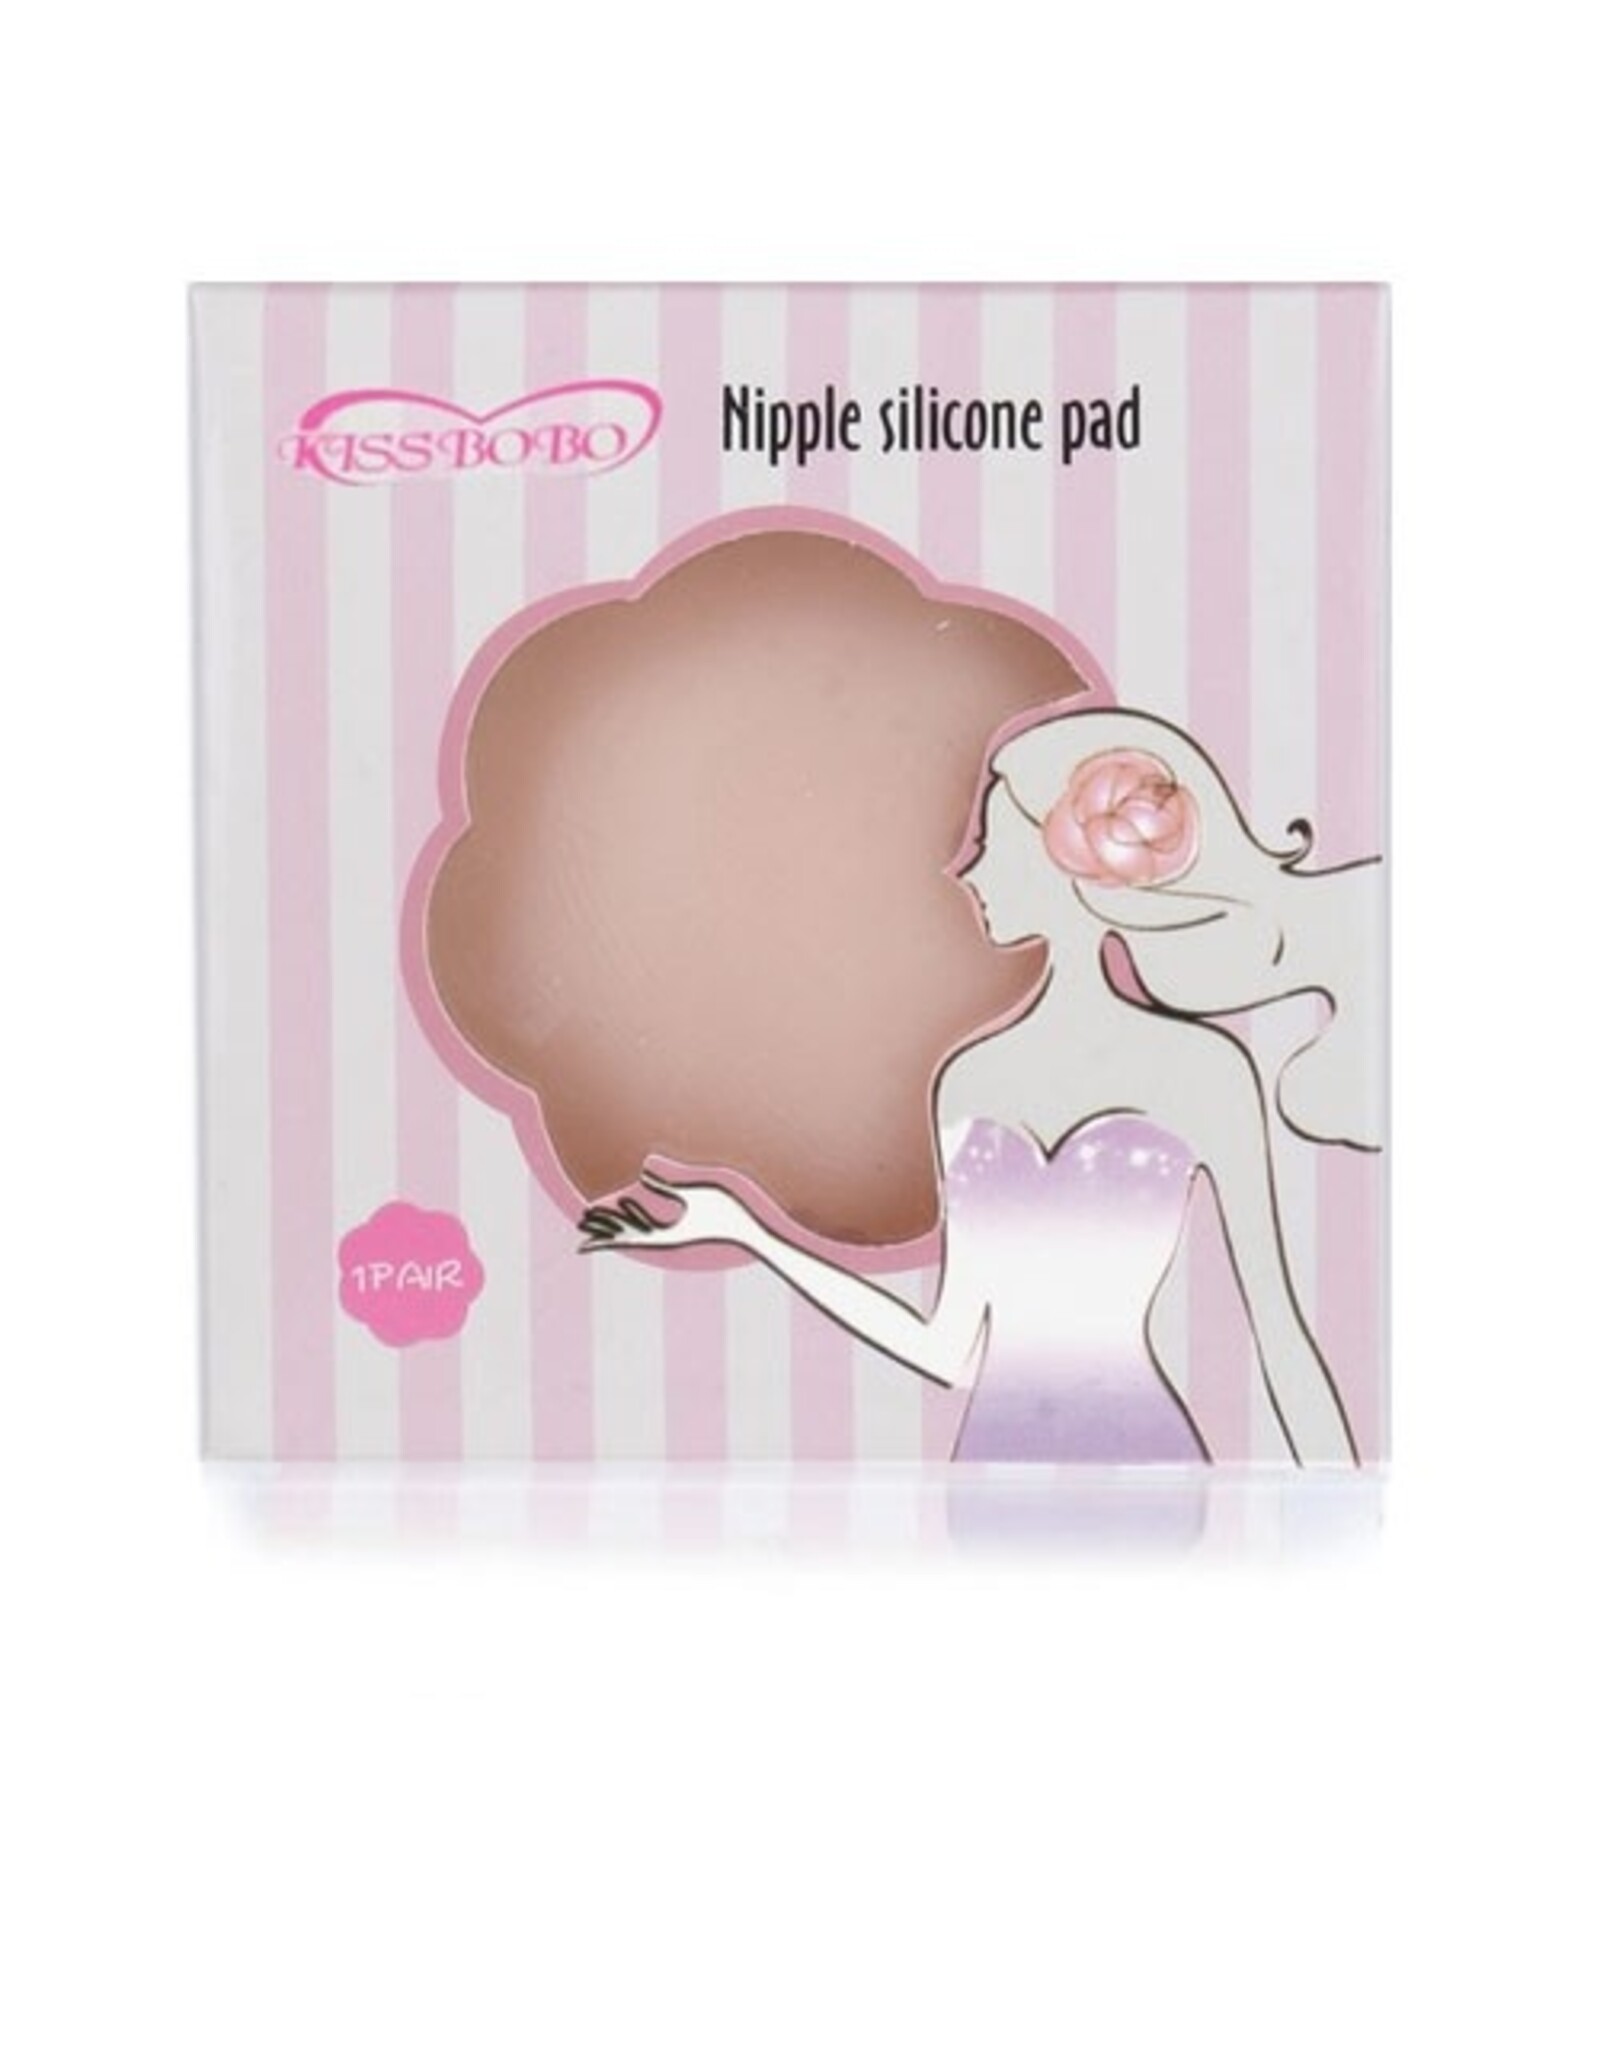 Miss Bliss Silicone Nipple Covers- Nude